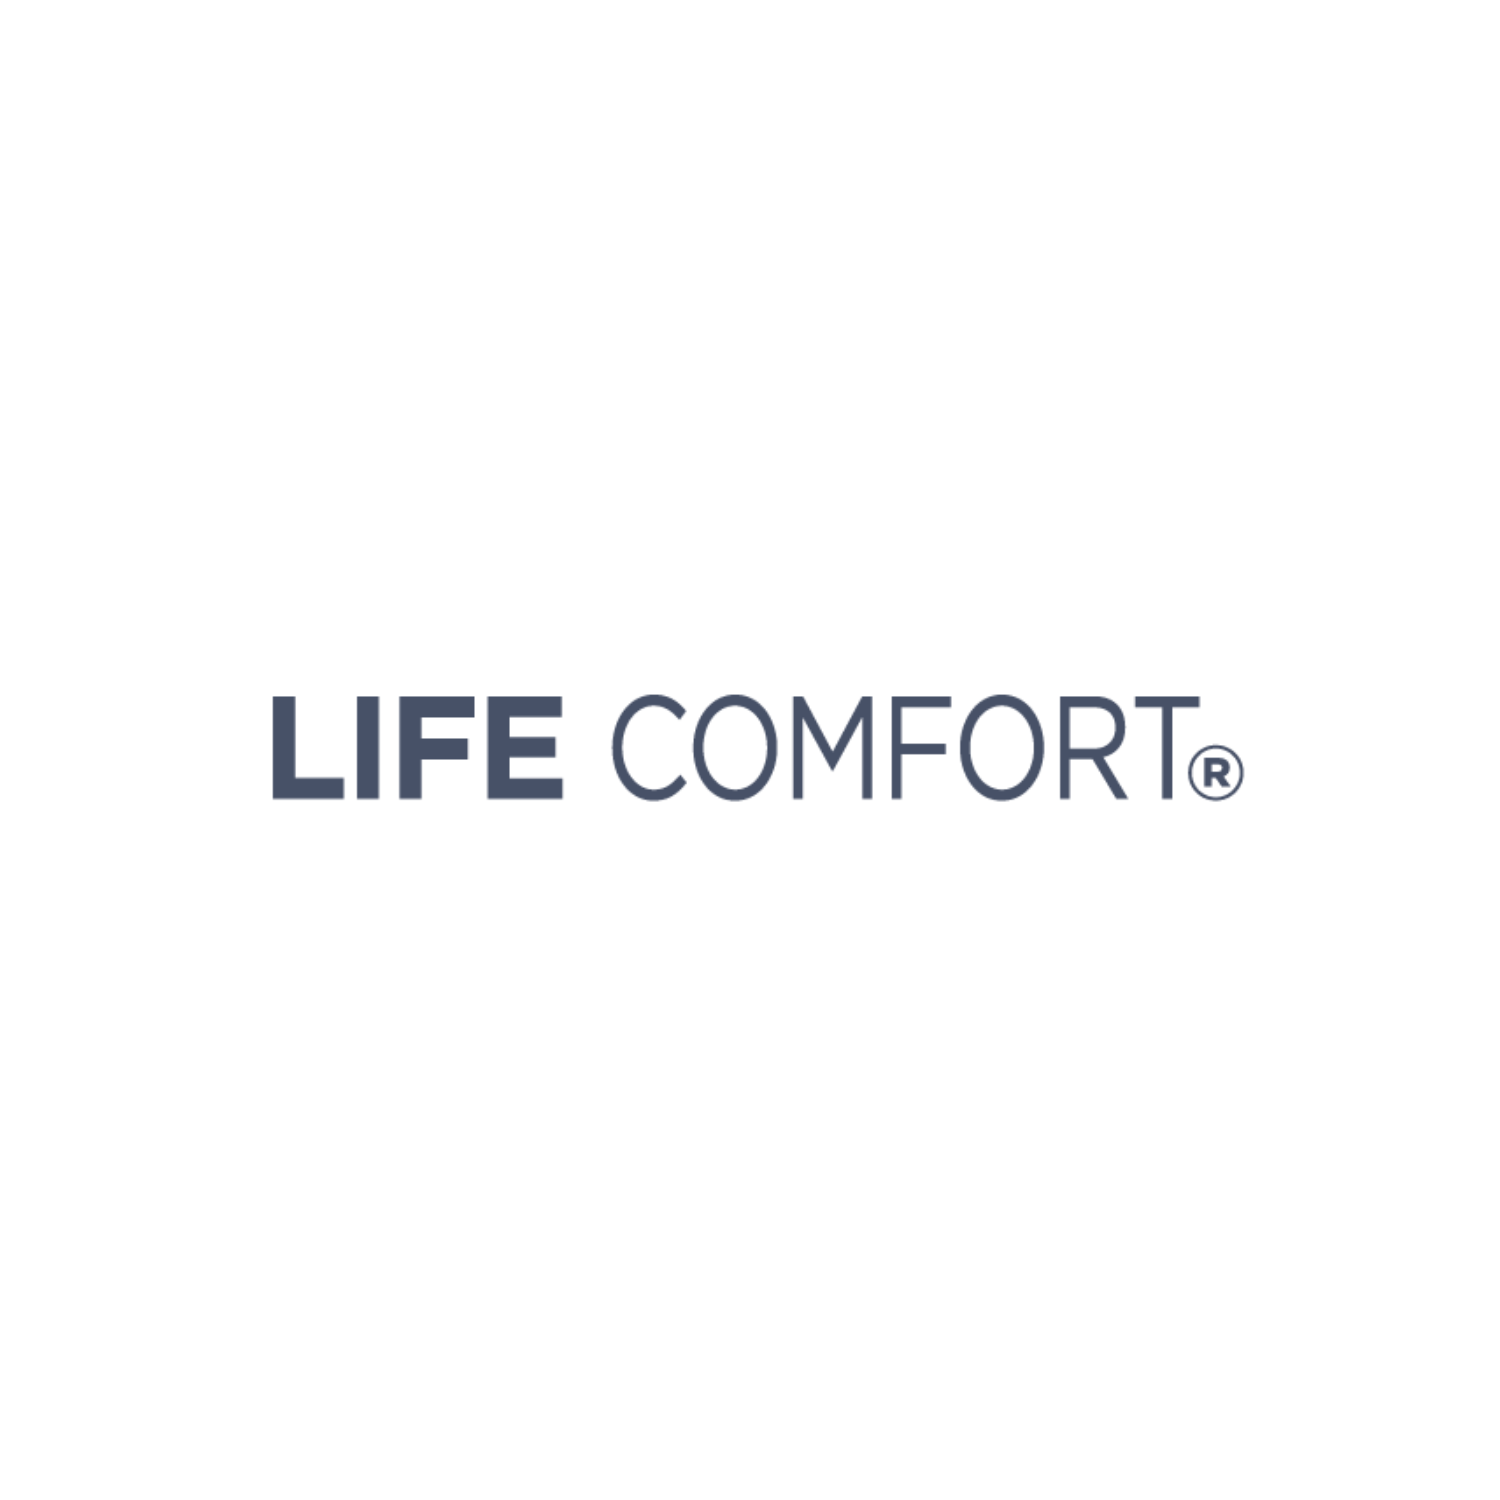 Shop Life Comfort products